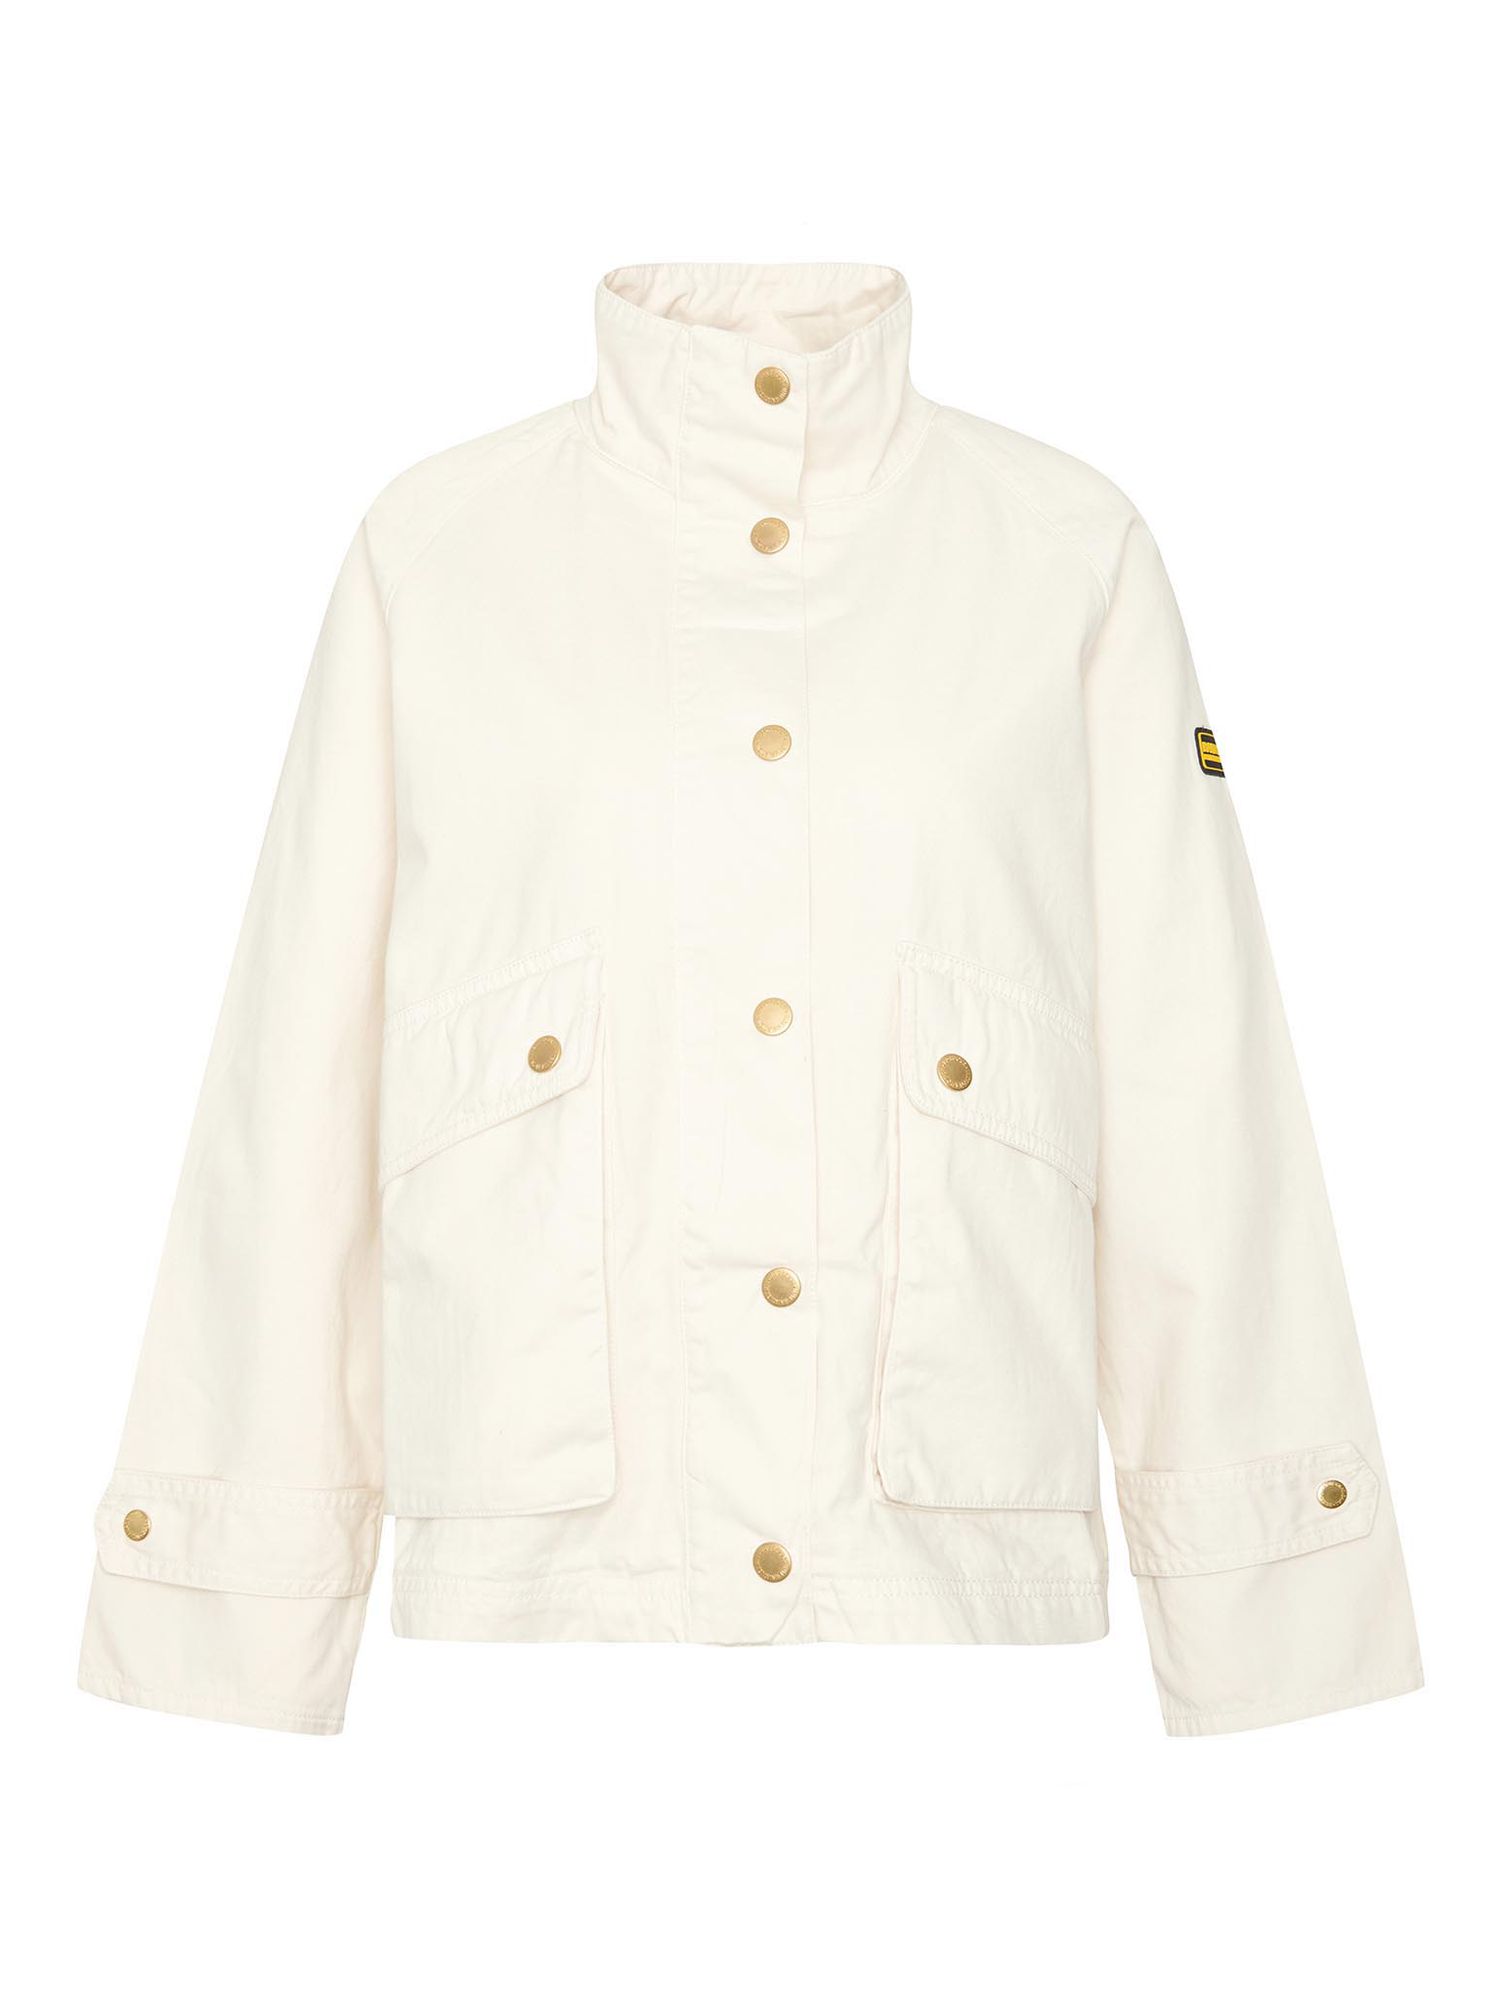 Buy Barbour International Whiston Casual Jacket, Blanc Online at johnlewis.com